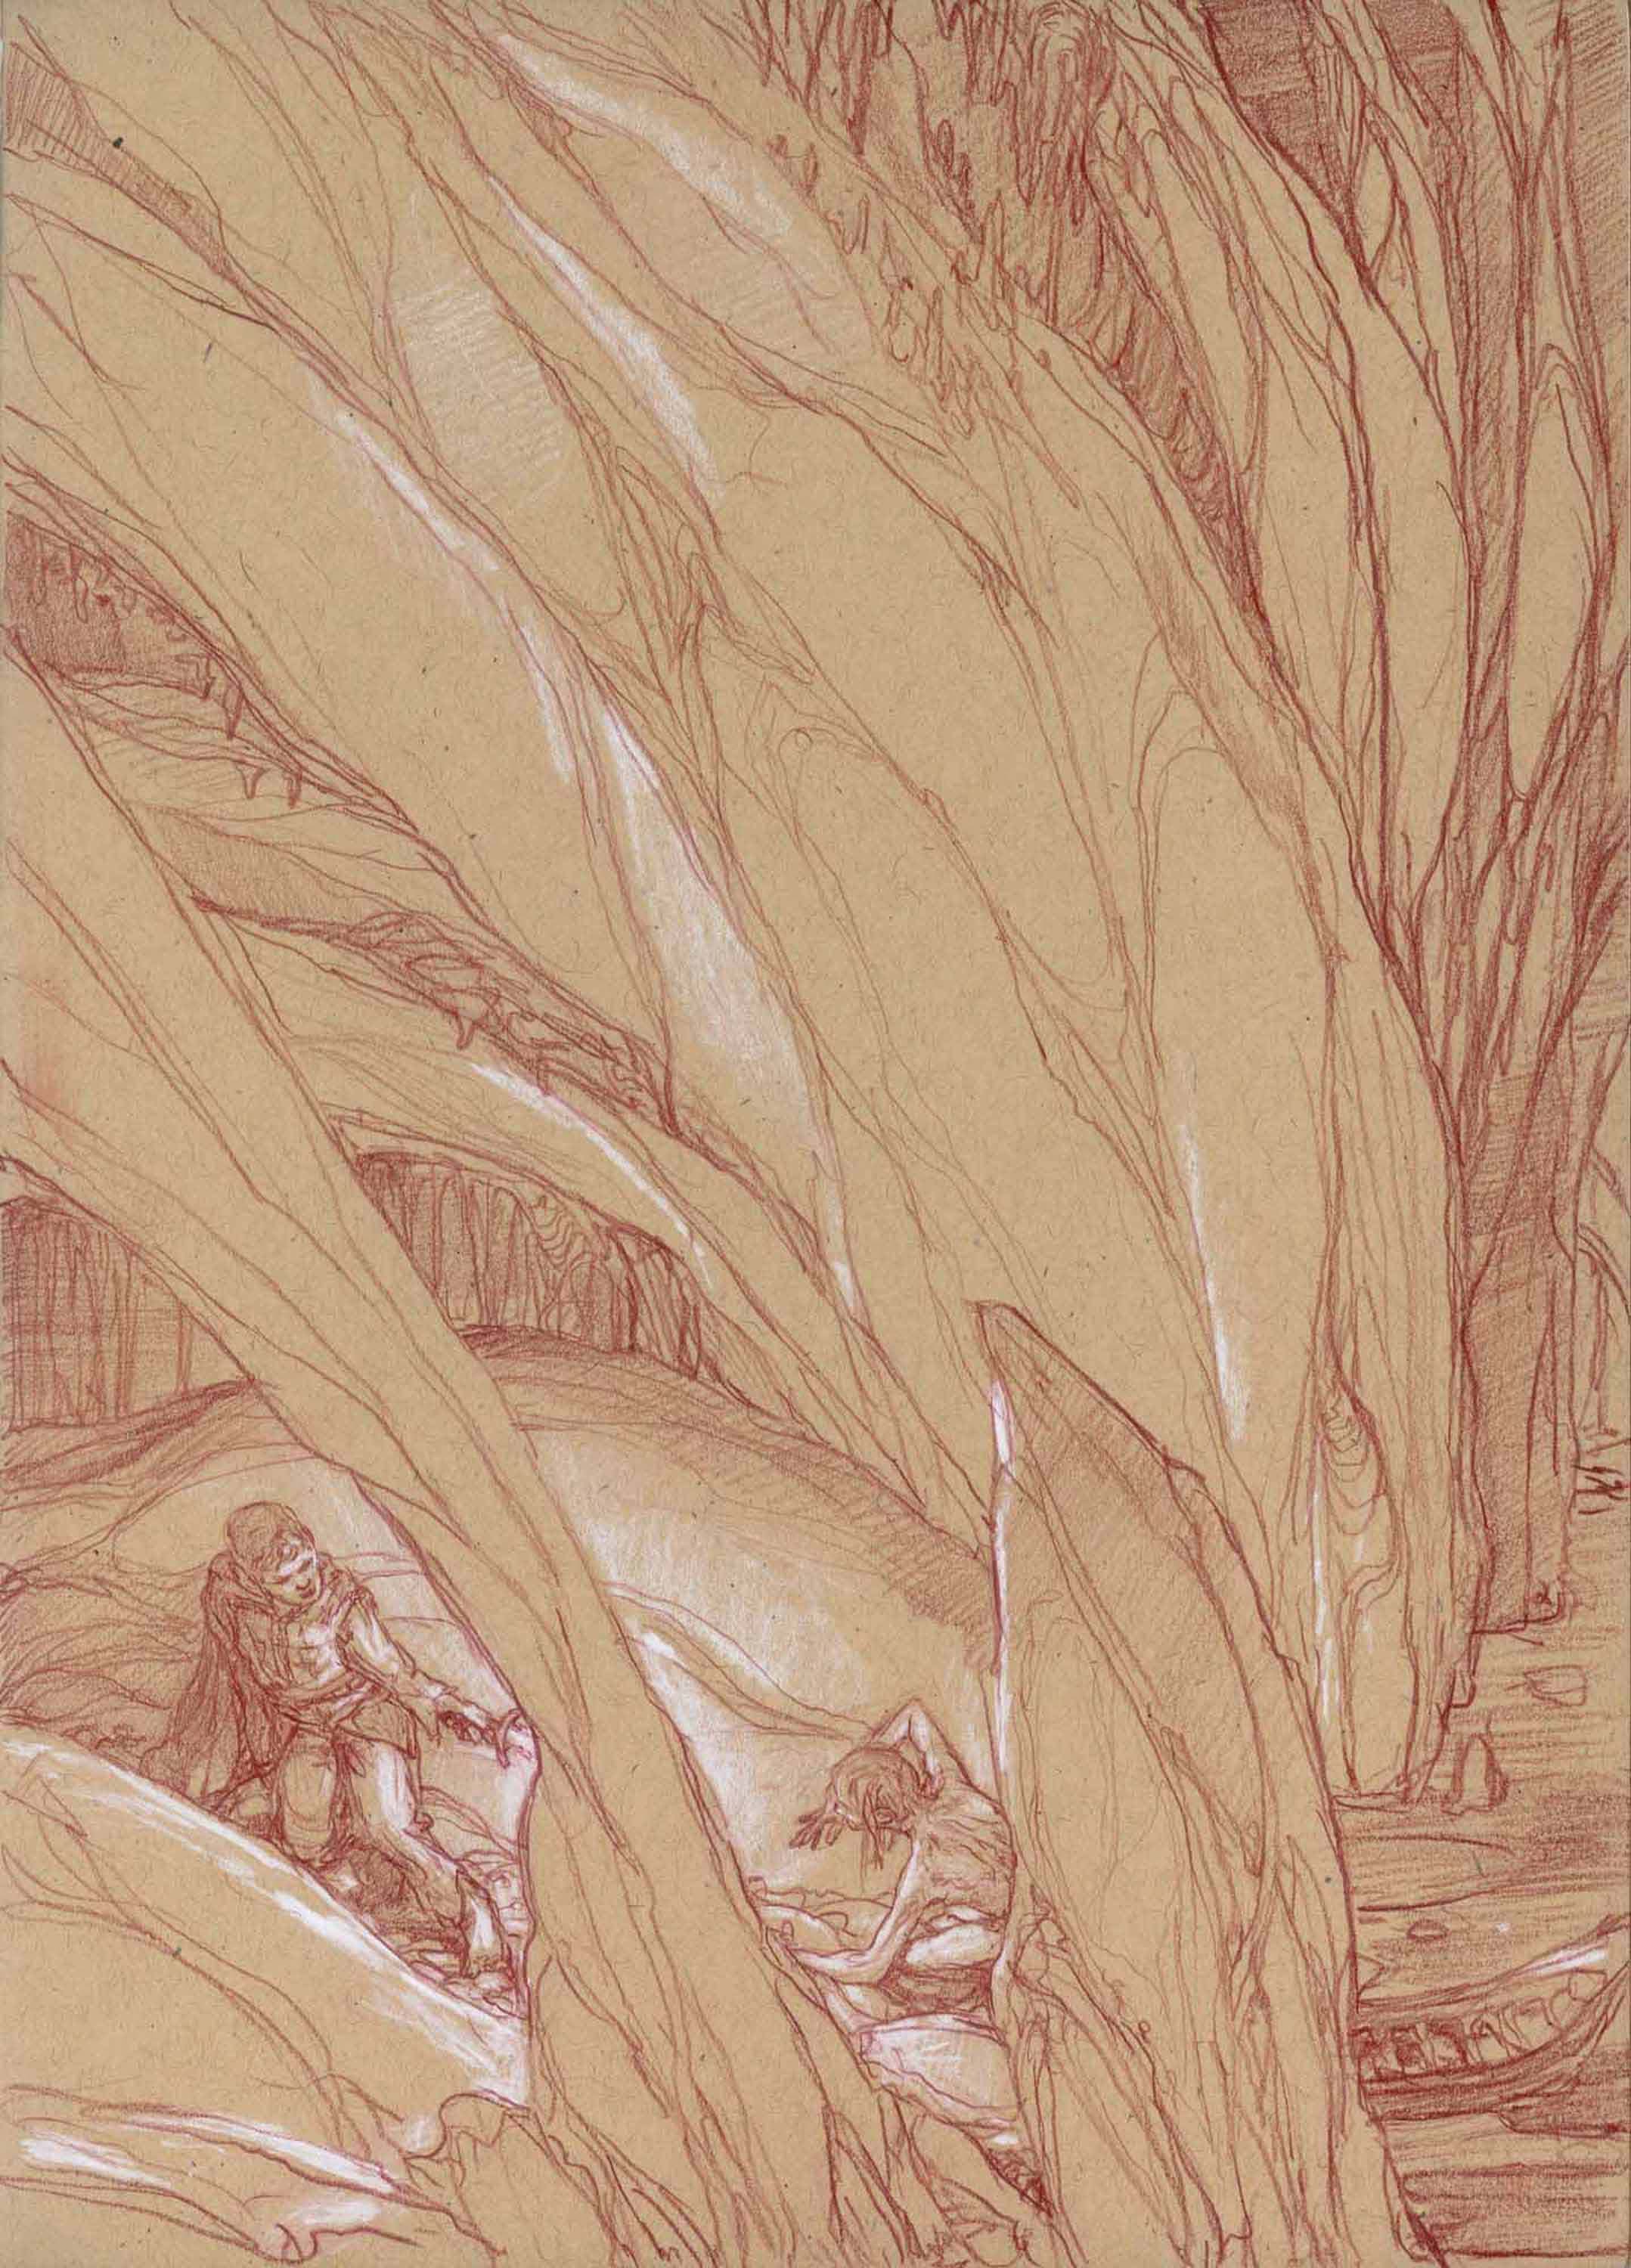 Riddles in the Dark
11" x 8"  Watercolor Pencil and Chalk on Toned paper 2012
private collection